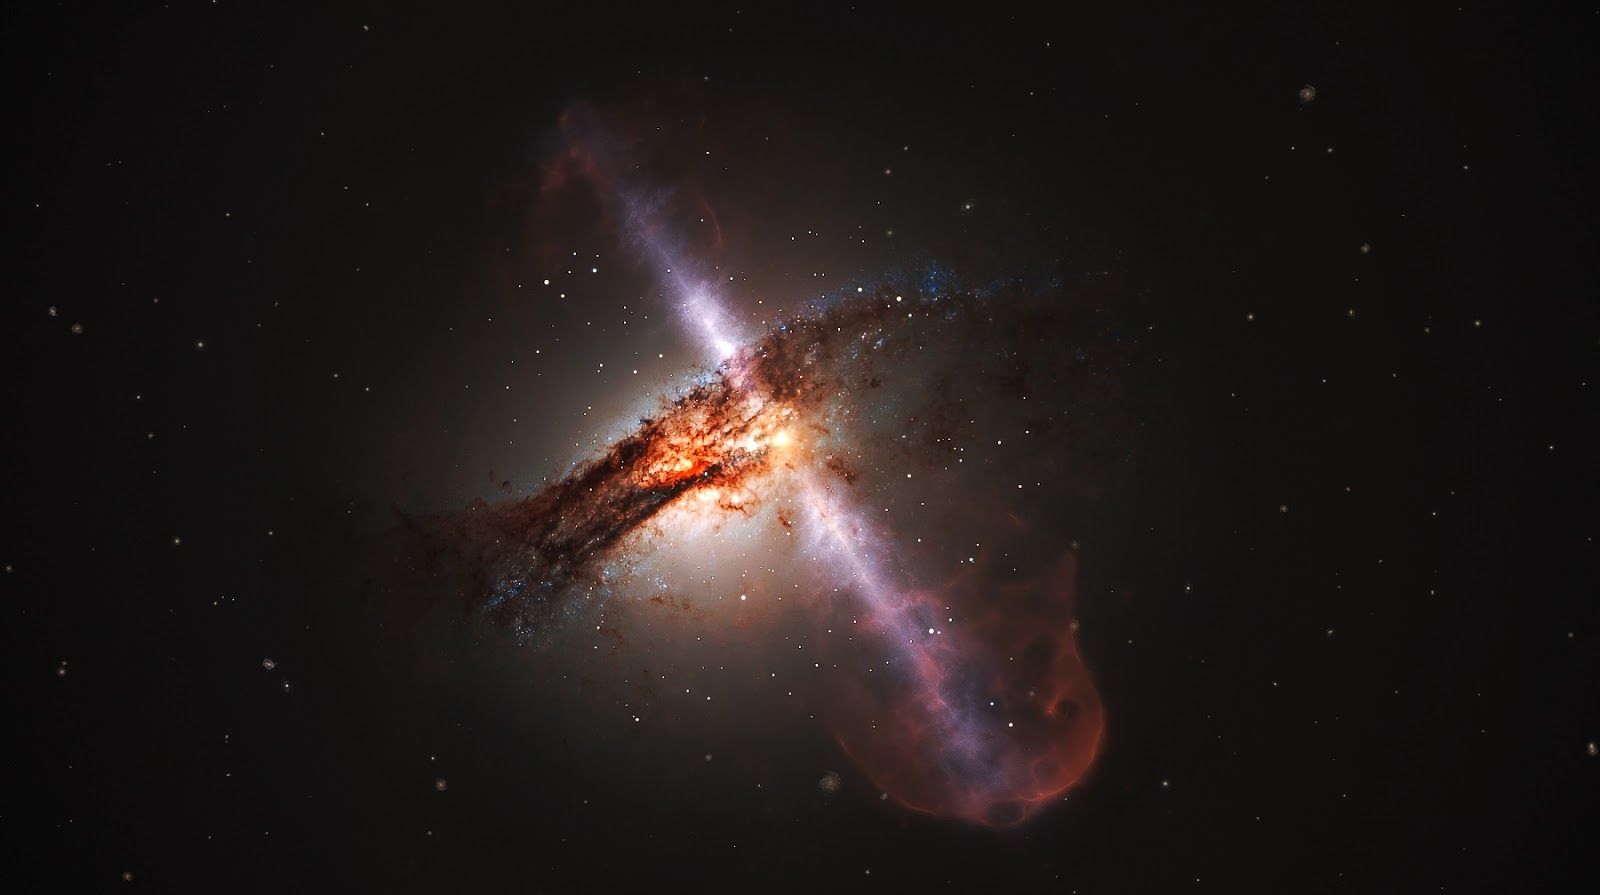 Image. An active galactic nucleus, or quasar, hosts a black hole with an accretion disk of matter orbiting around and two jets of plasma beaming outward. Credit: ESA/Hubble, L. Calçada (ESO)